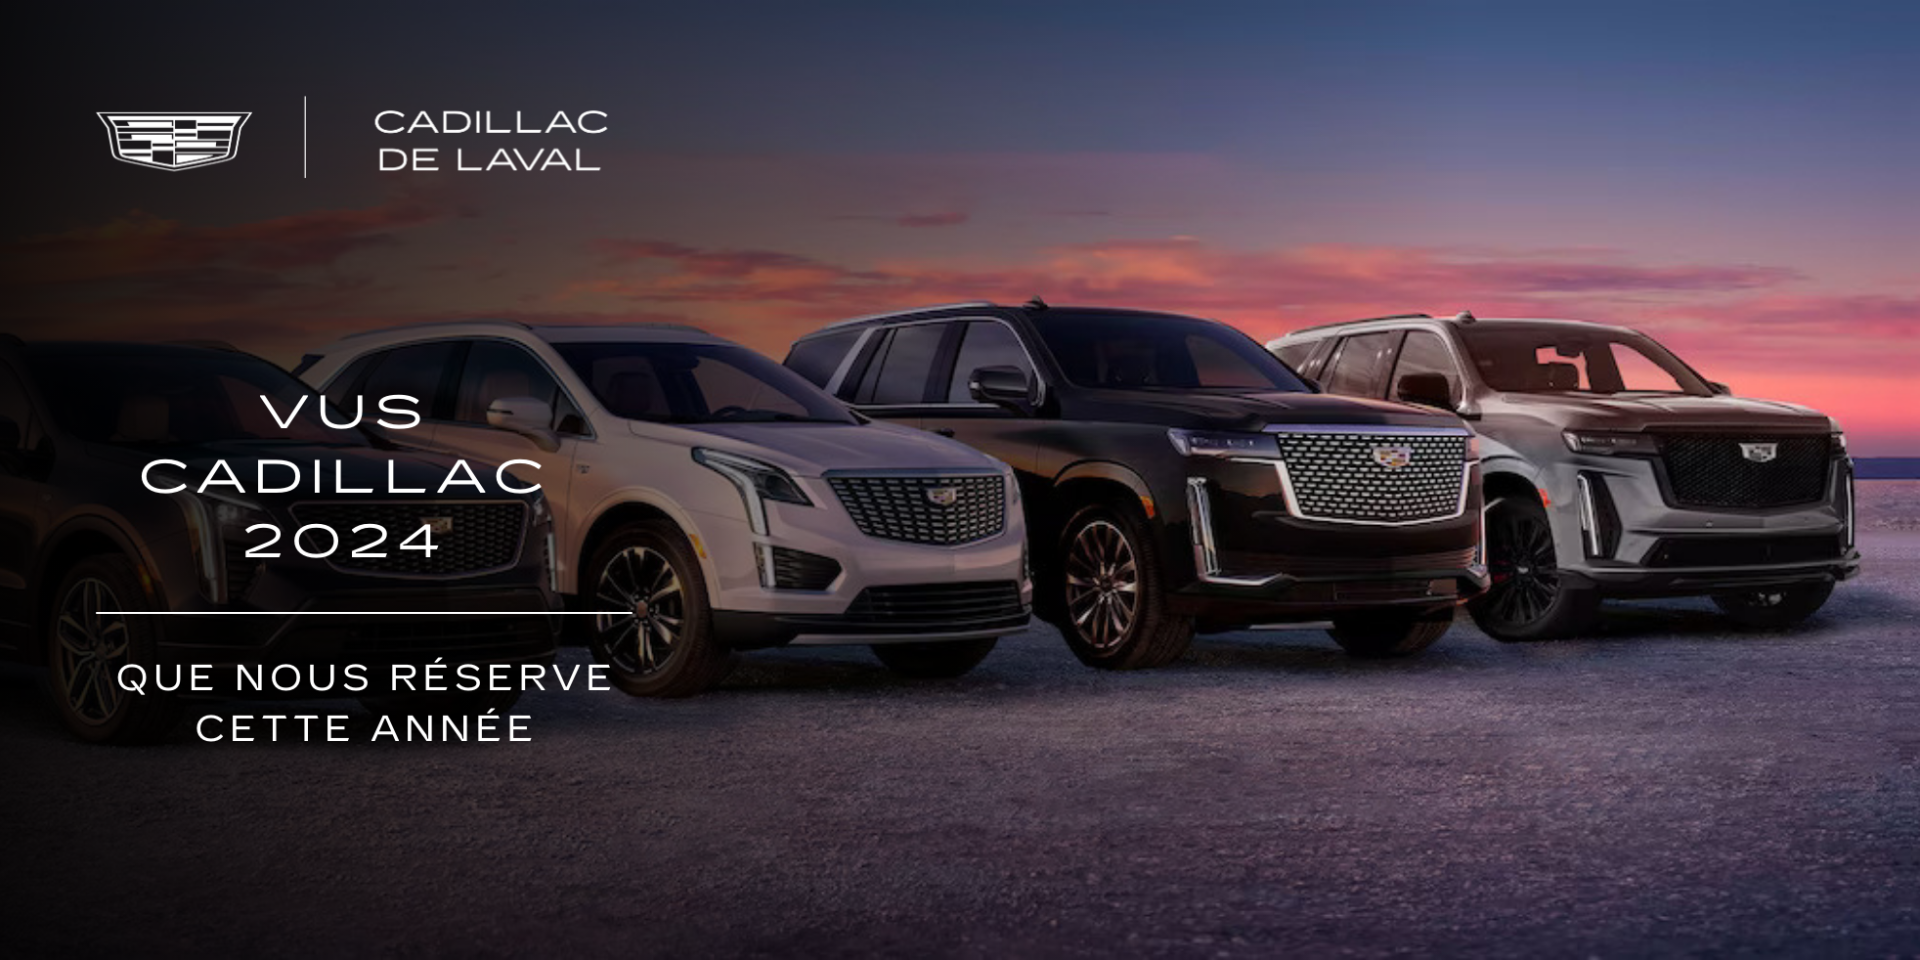 2024 Cadillac SUVs: What’s in Store for this New Model-Year